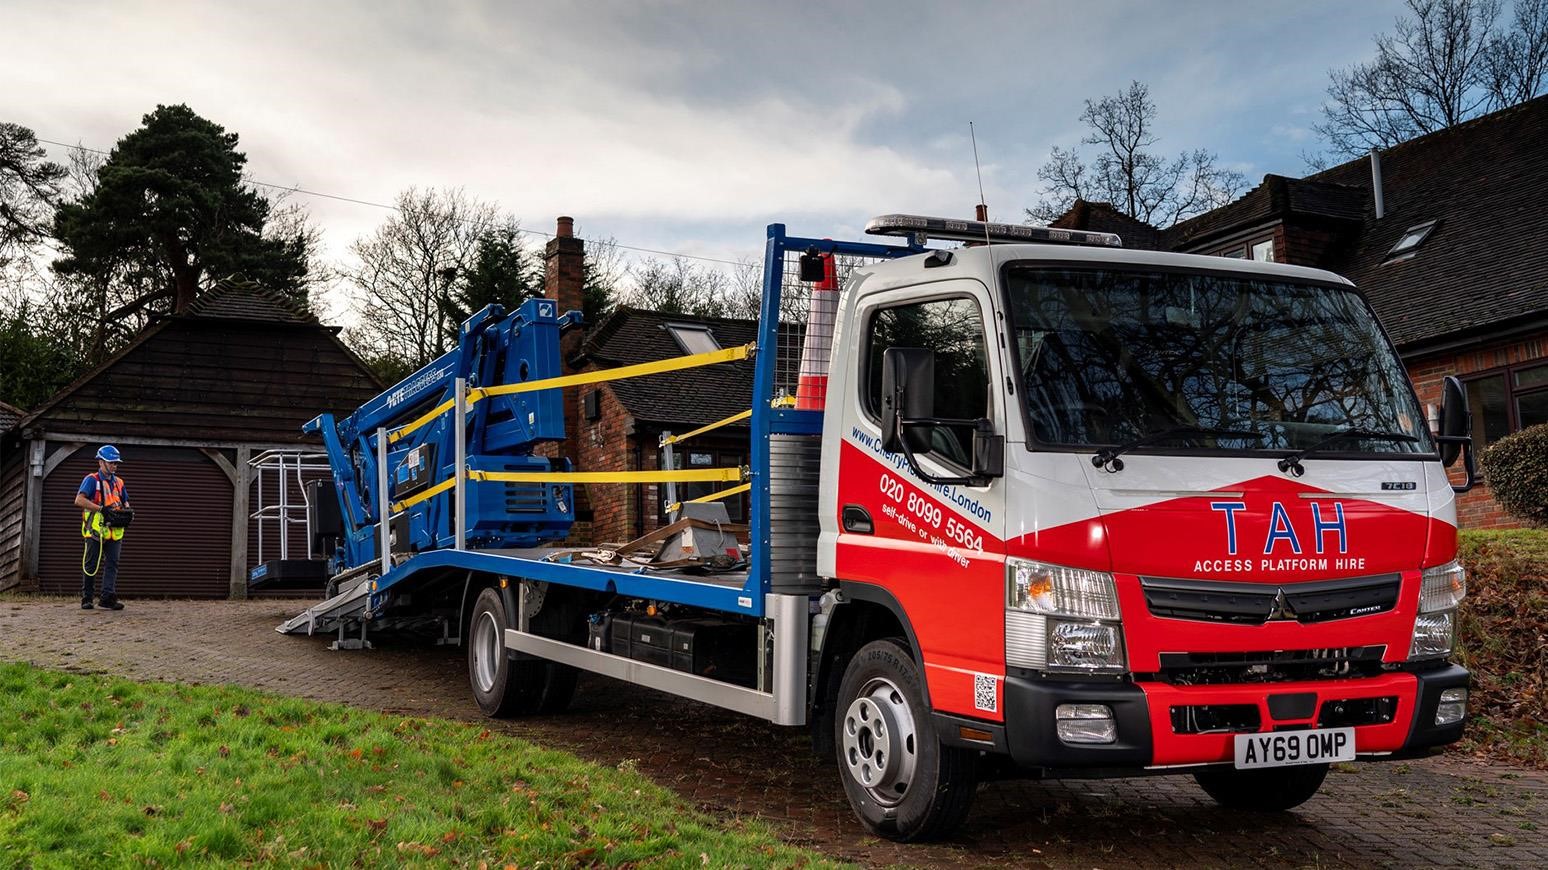 TAH Access Platform Hire Purchases Mitsubishi FUSO Canter To Transport Equipment Around London